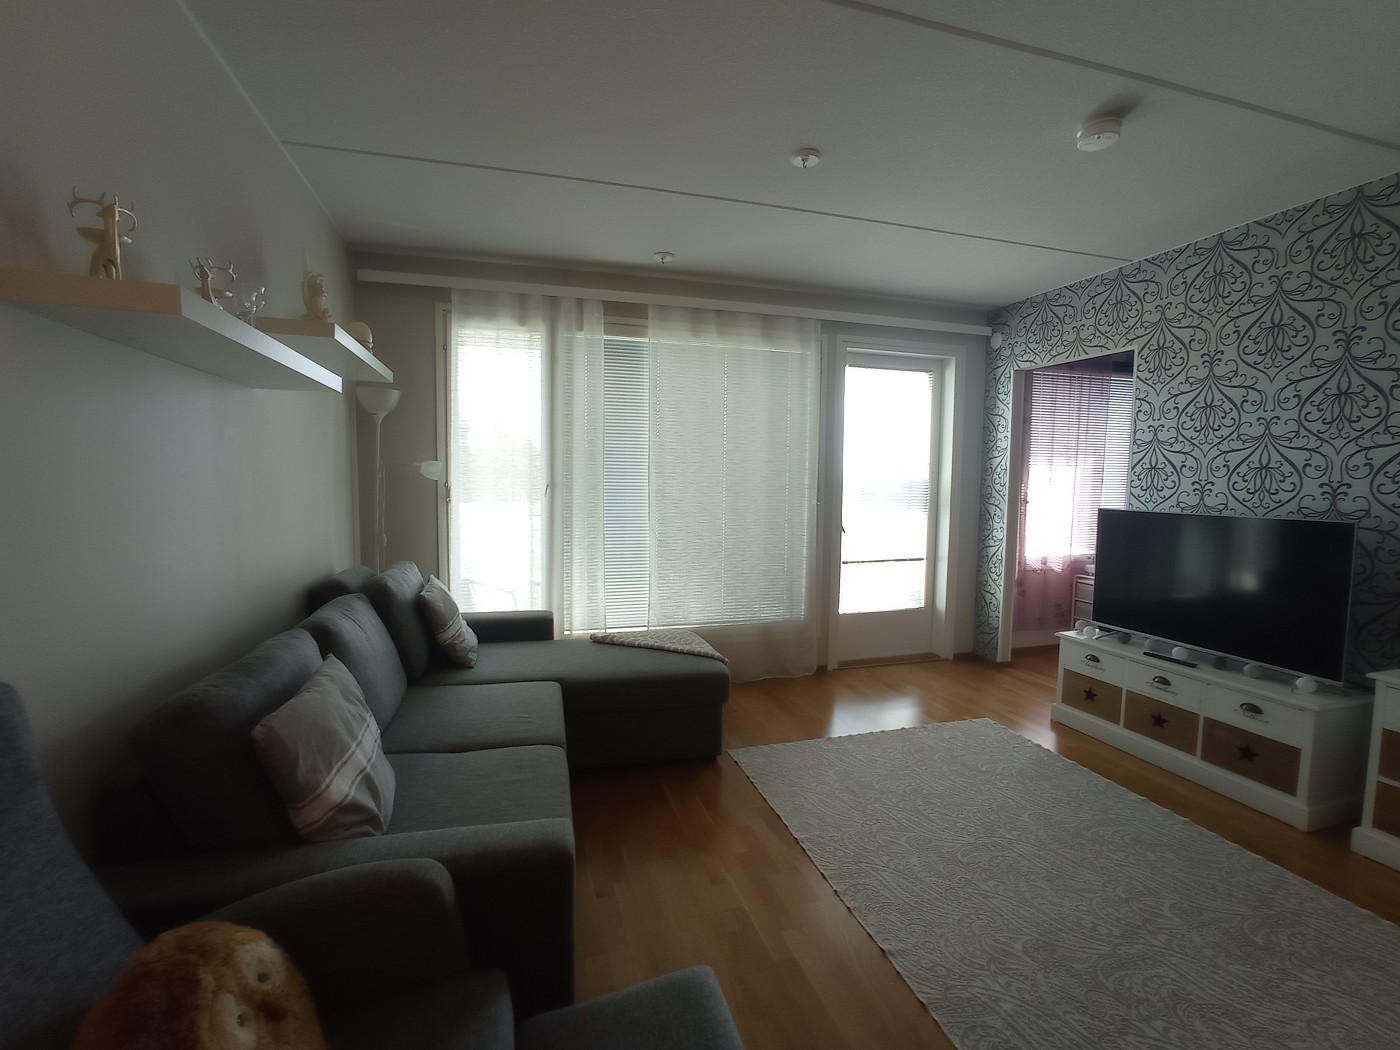 Living room tv couch accommodation in Finland Airbnb Tornio